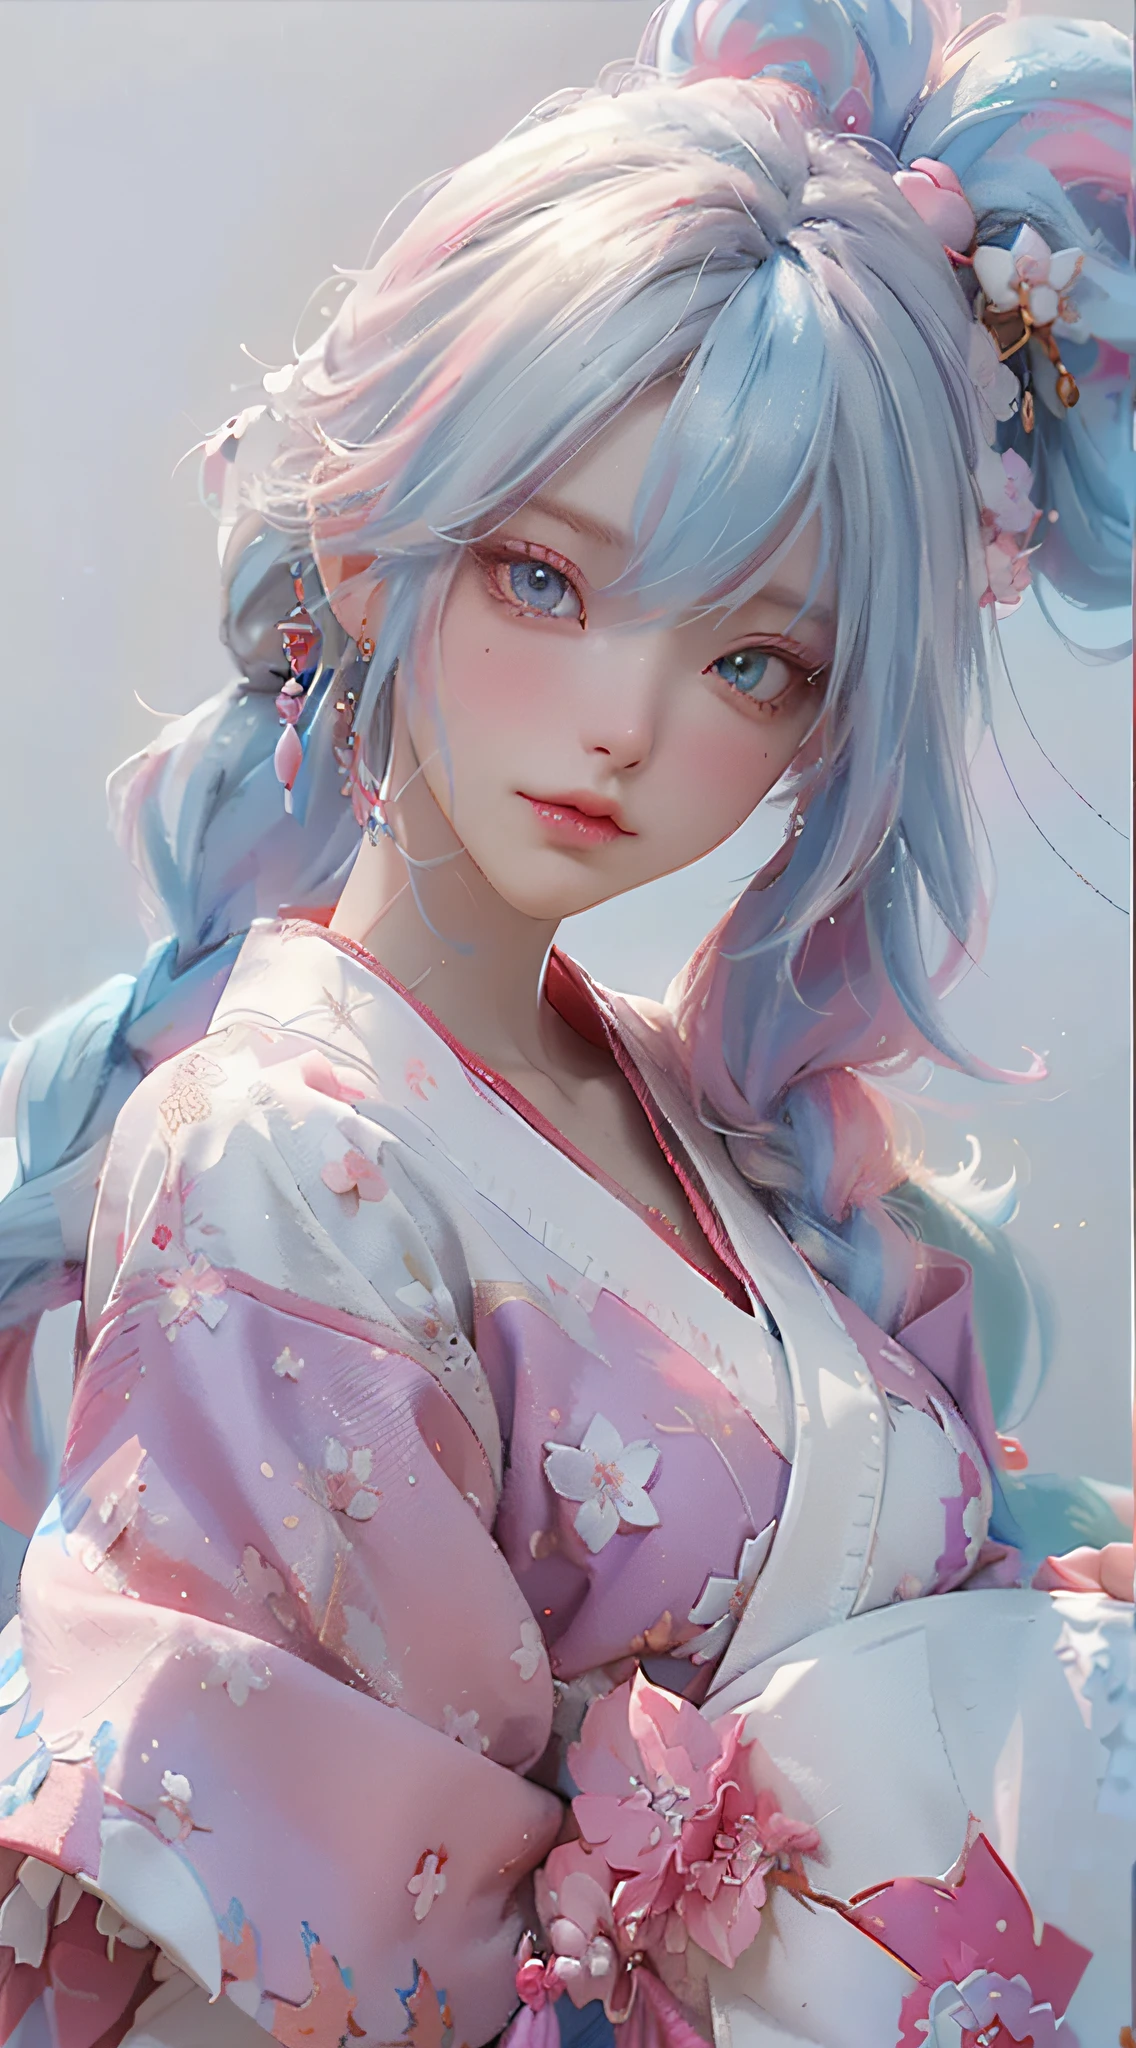 Anime girl with white hair and - SeaArt AI